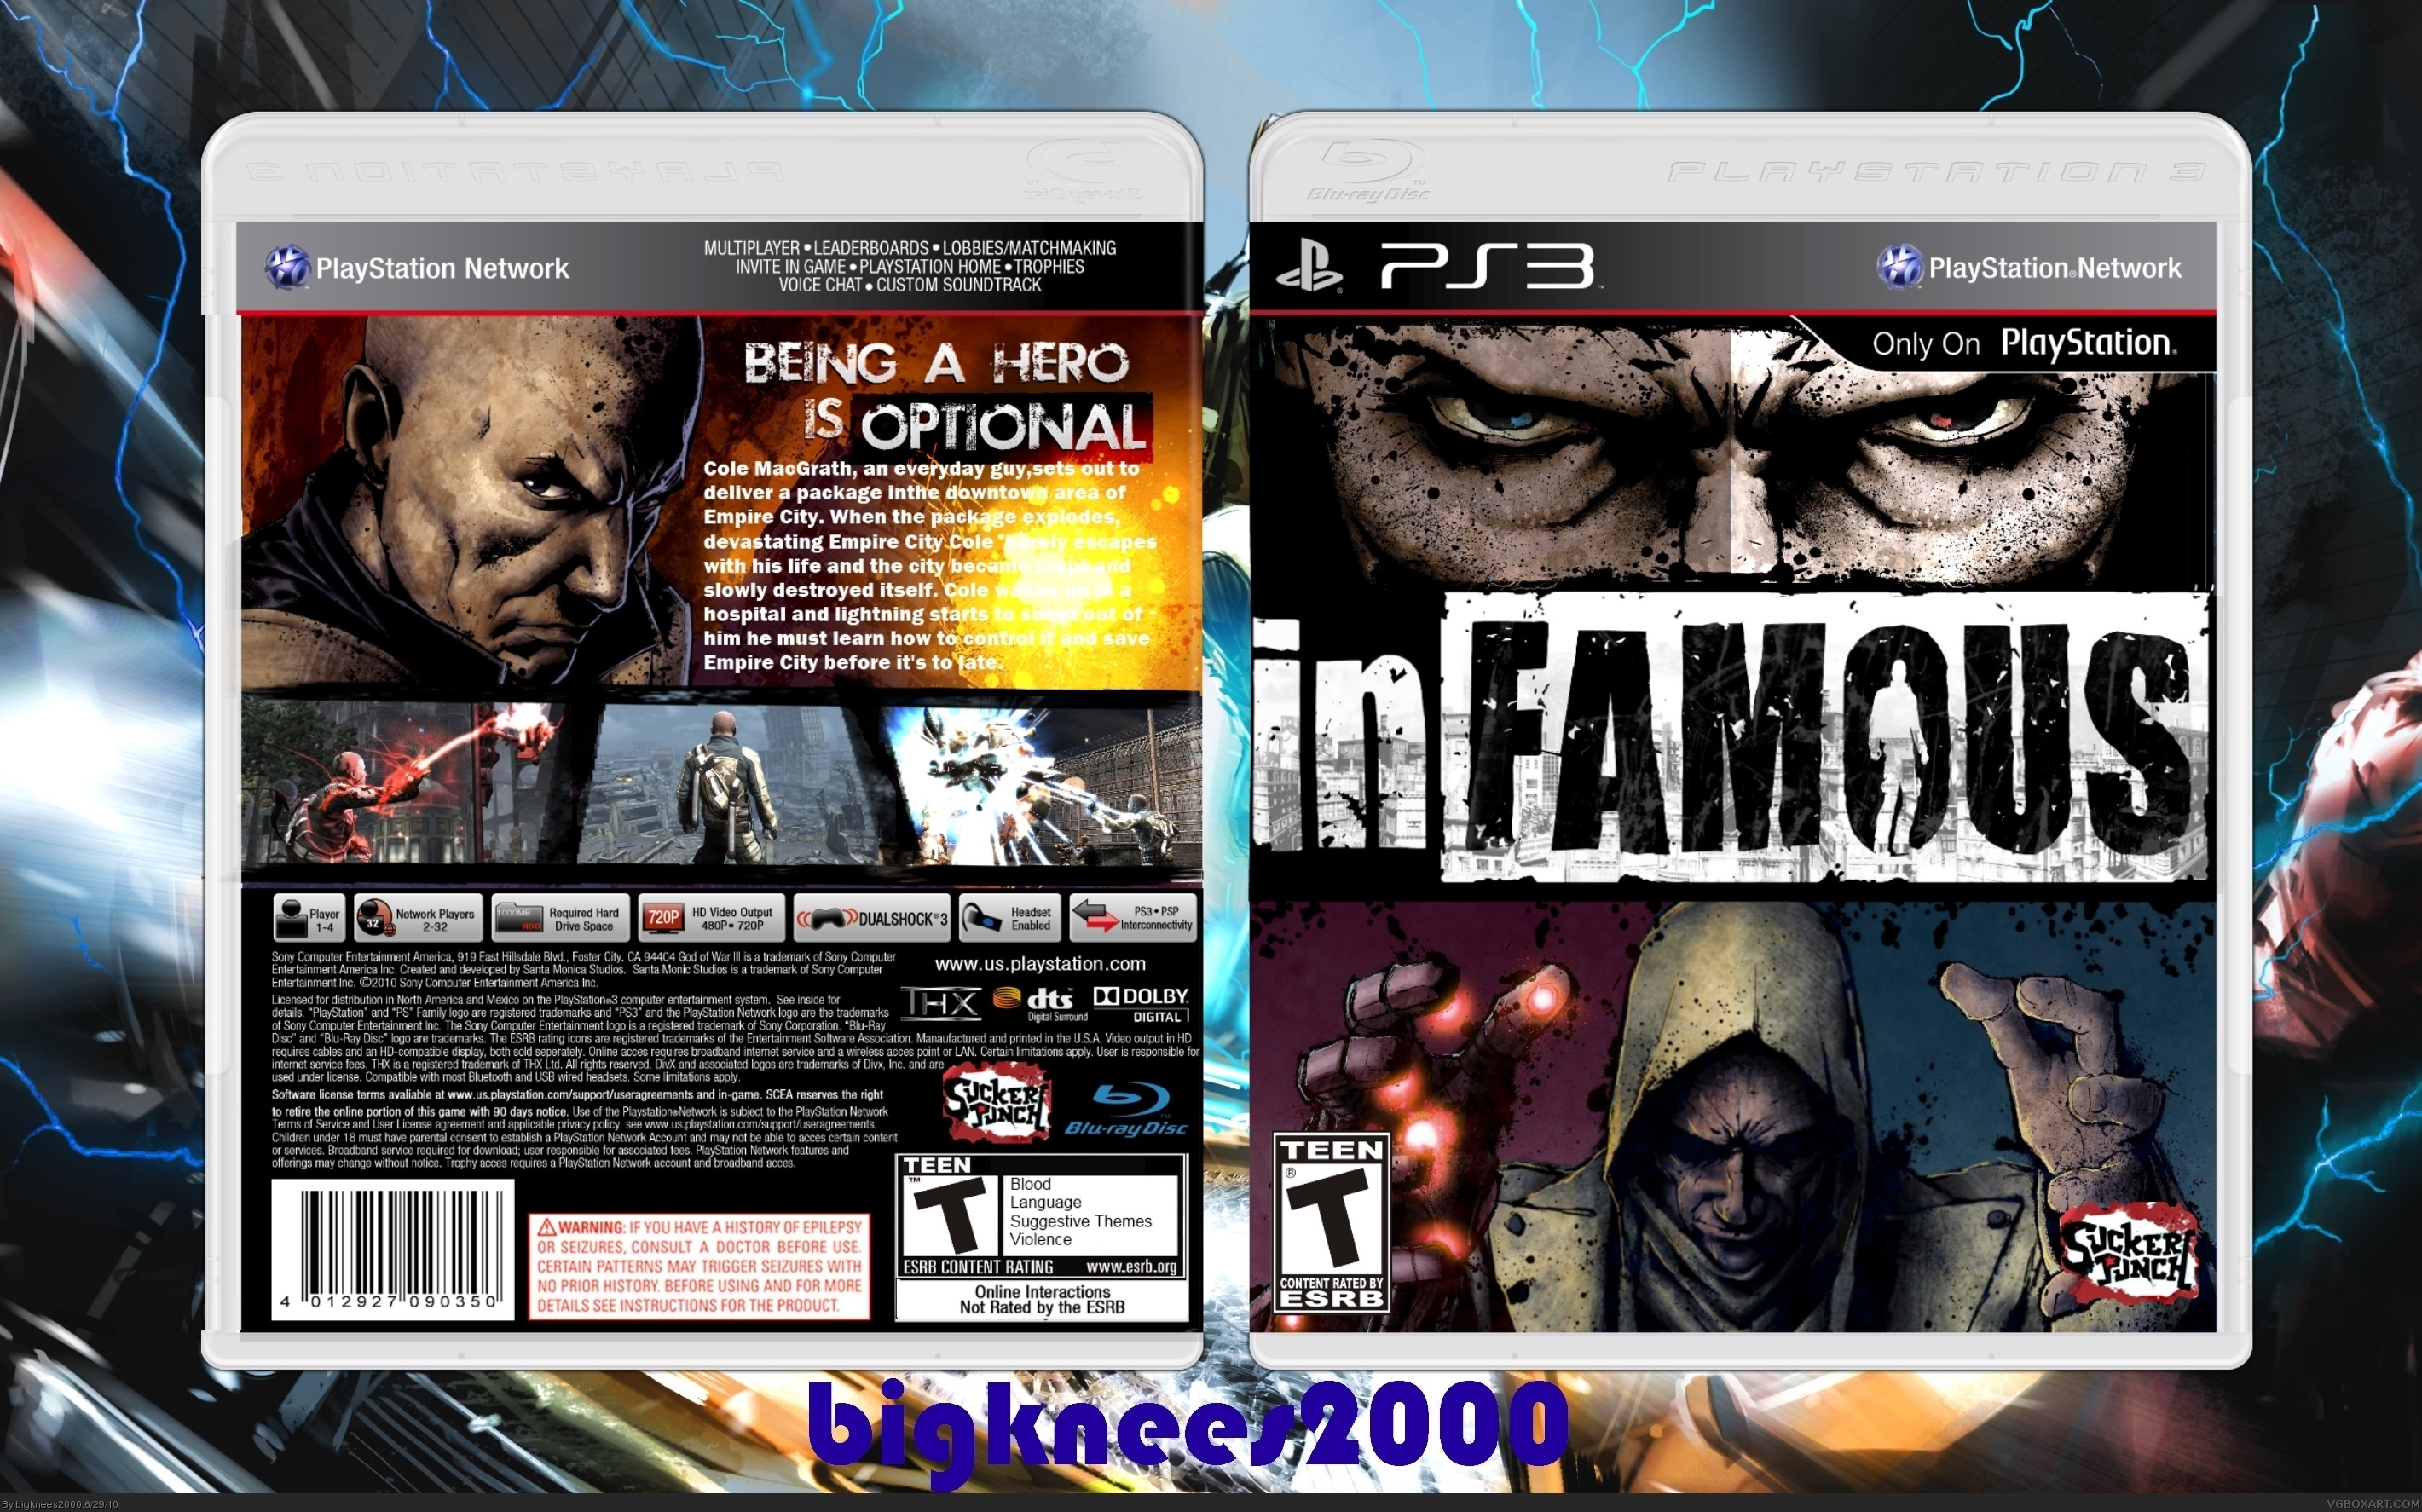 inFAMOUS box cover